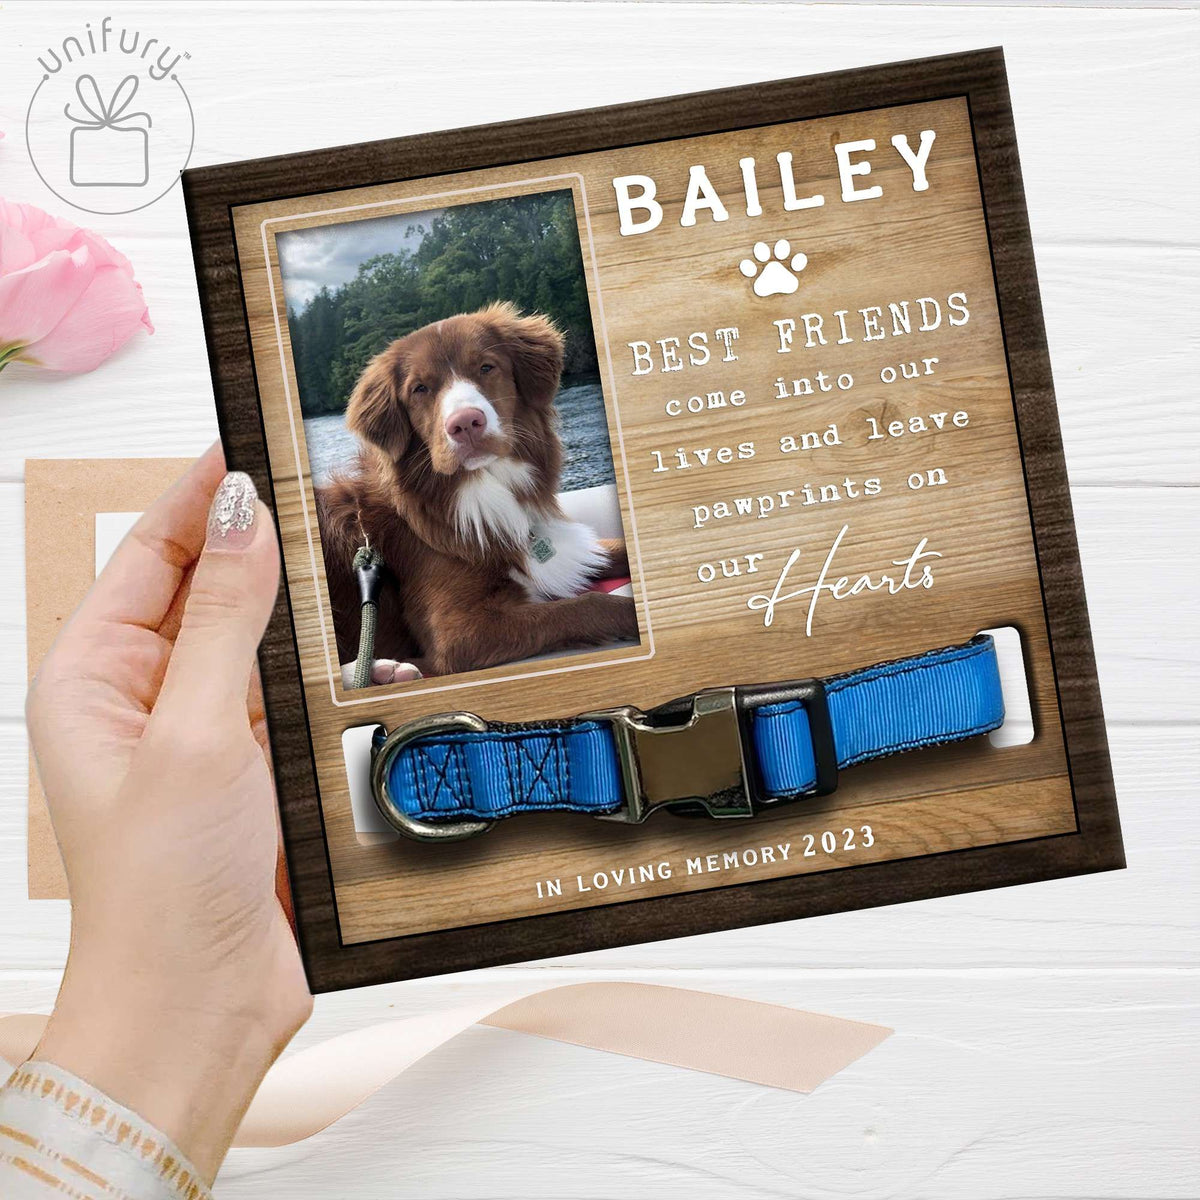 Best Friends Come Into Our Lives Personalized Memorial Wooden Pet Collar Frame